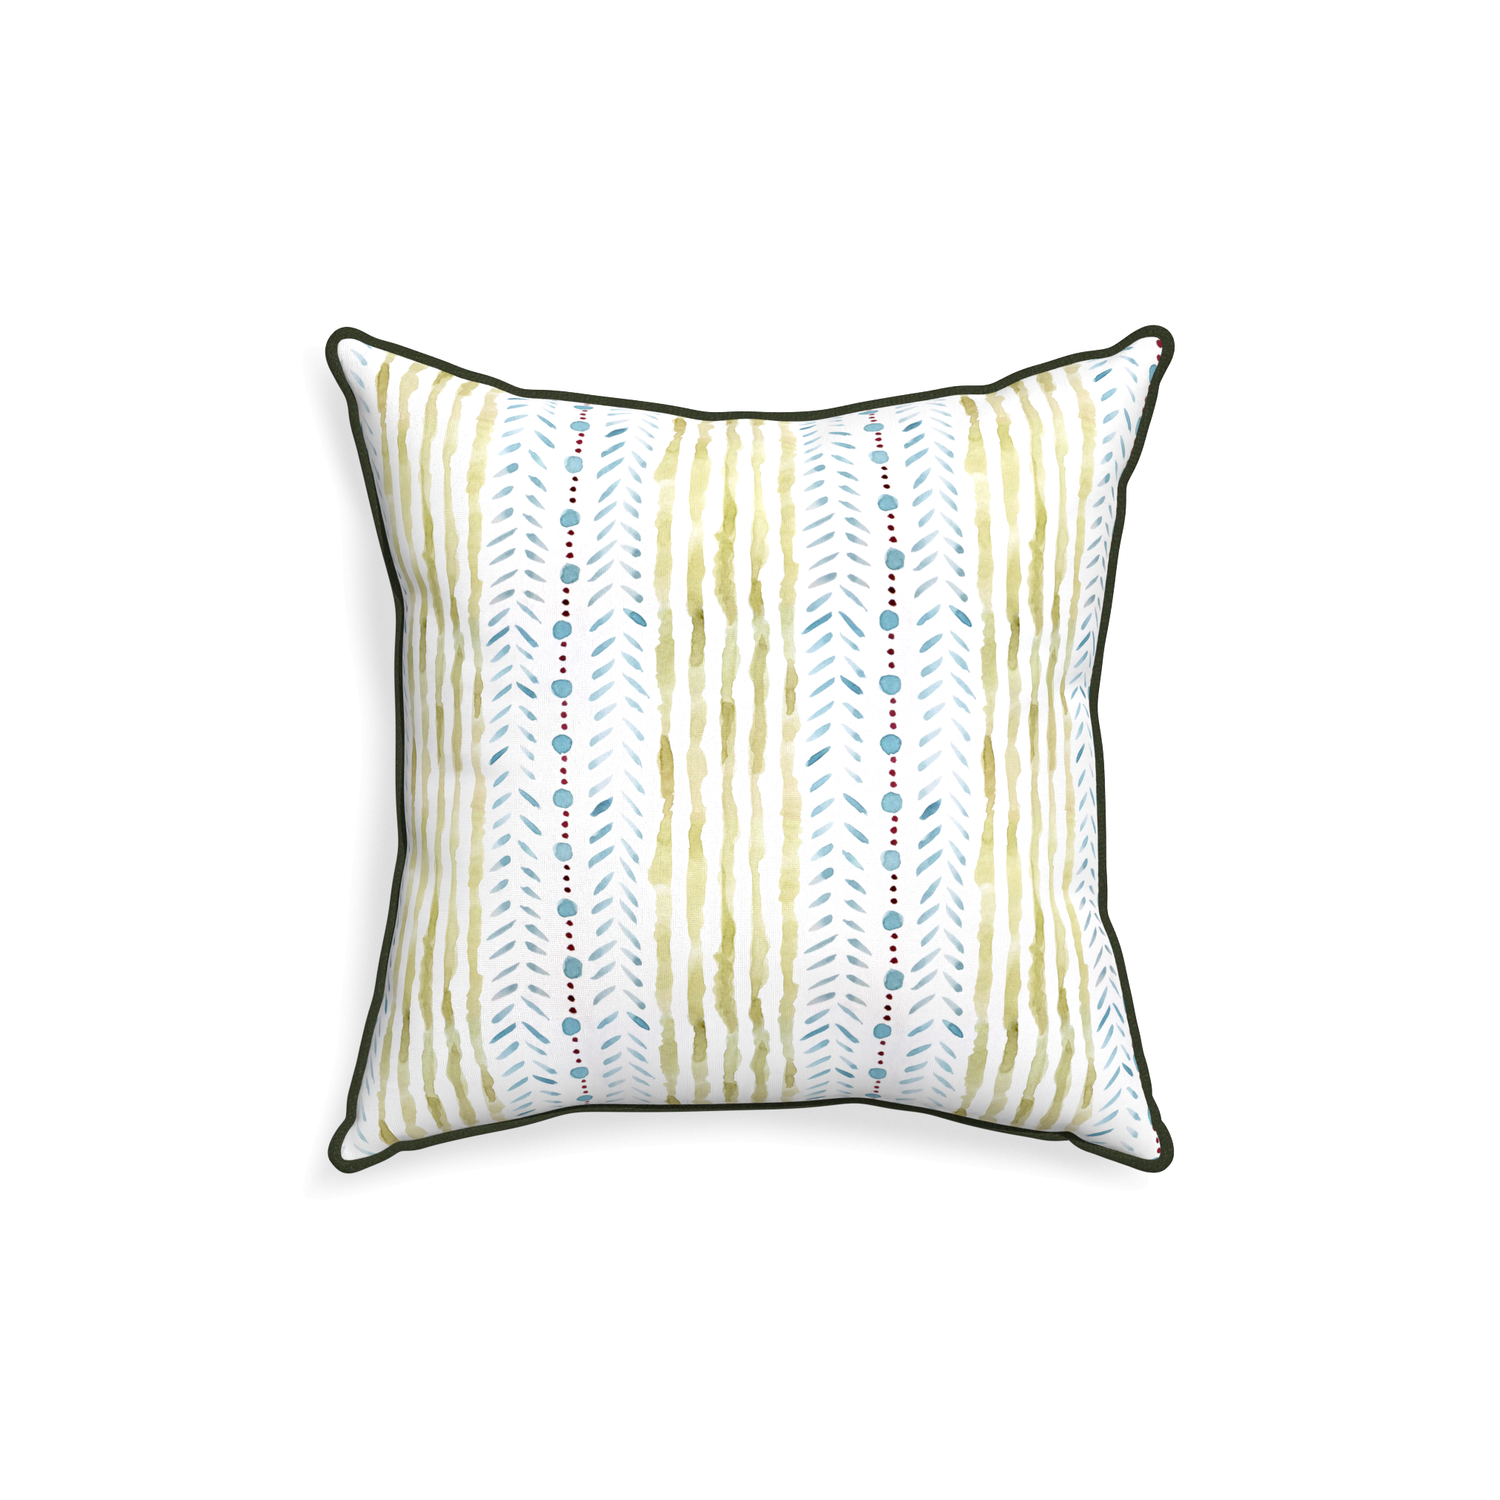 18-square julia custom blue & green stripedpillow with f piping on white background